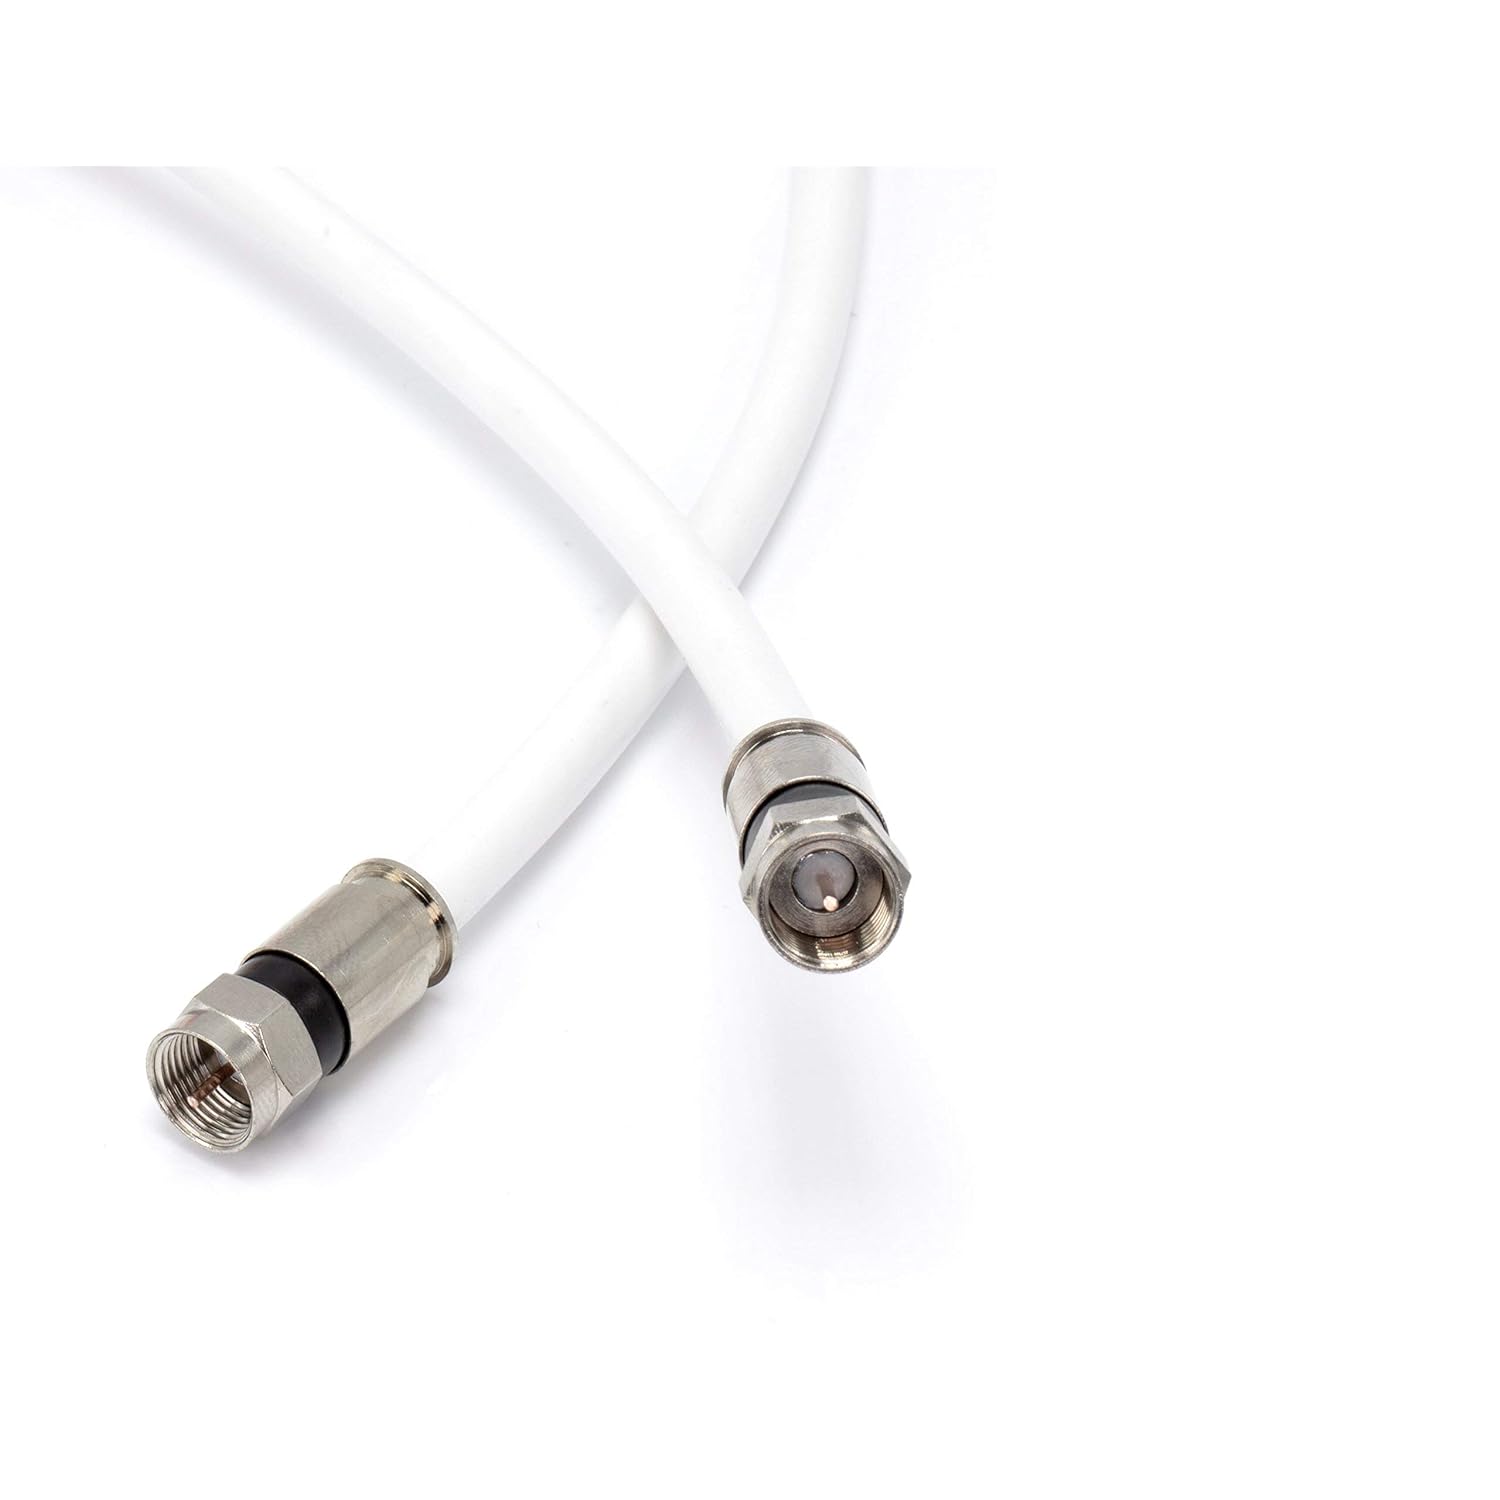 The Cimple Co 12' Feet, White RG6 Coaxial Cable (Coax Cable) with Weather Proof Connectors, F81 / RF, Digital Coax - AV, Cable TV, Anten…